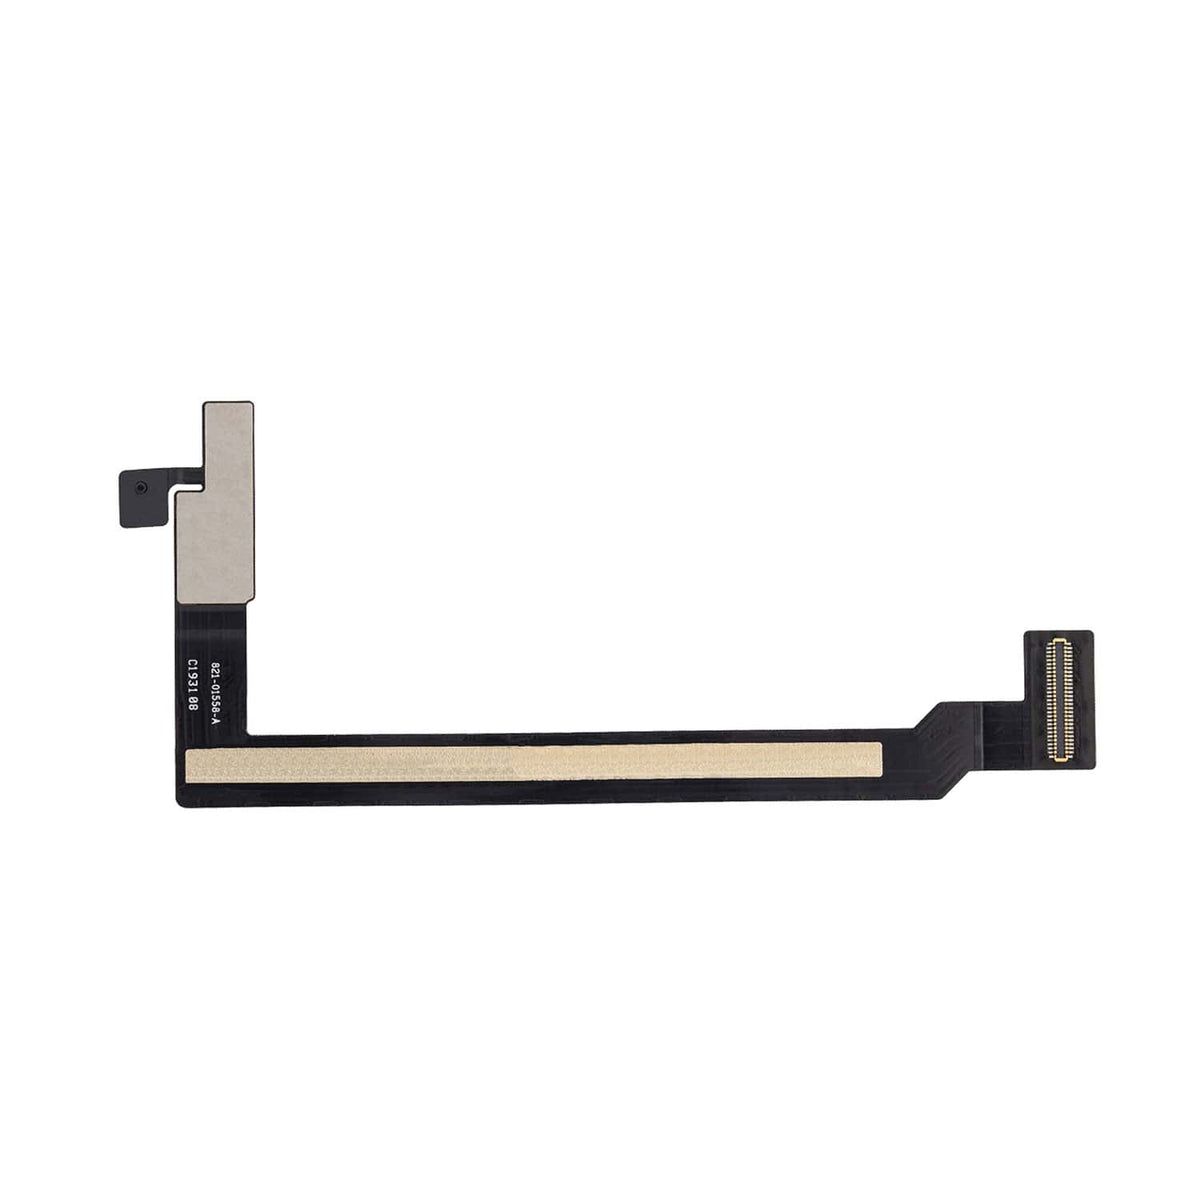 REAR CAMERA EXTENSION FLEX CABLE FOR IPAD PRO 12.9 3RD